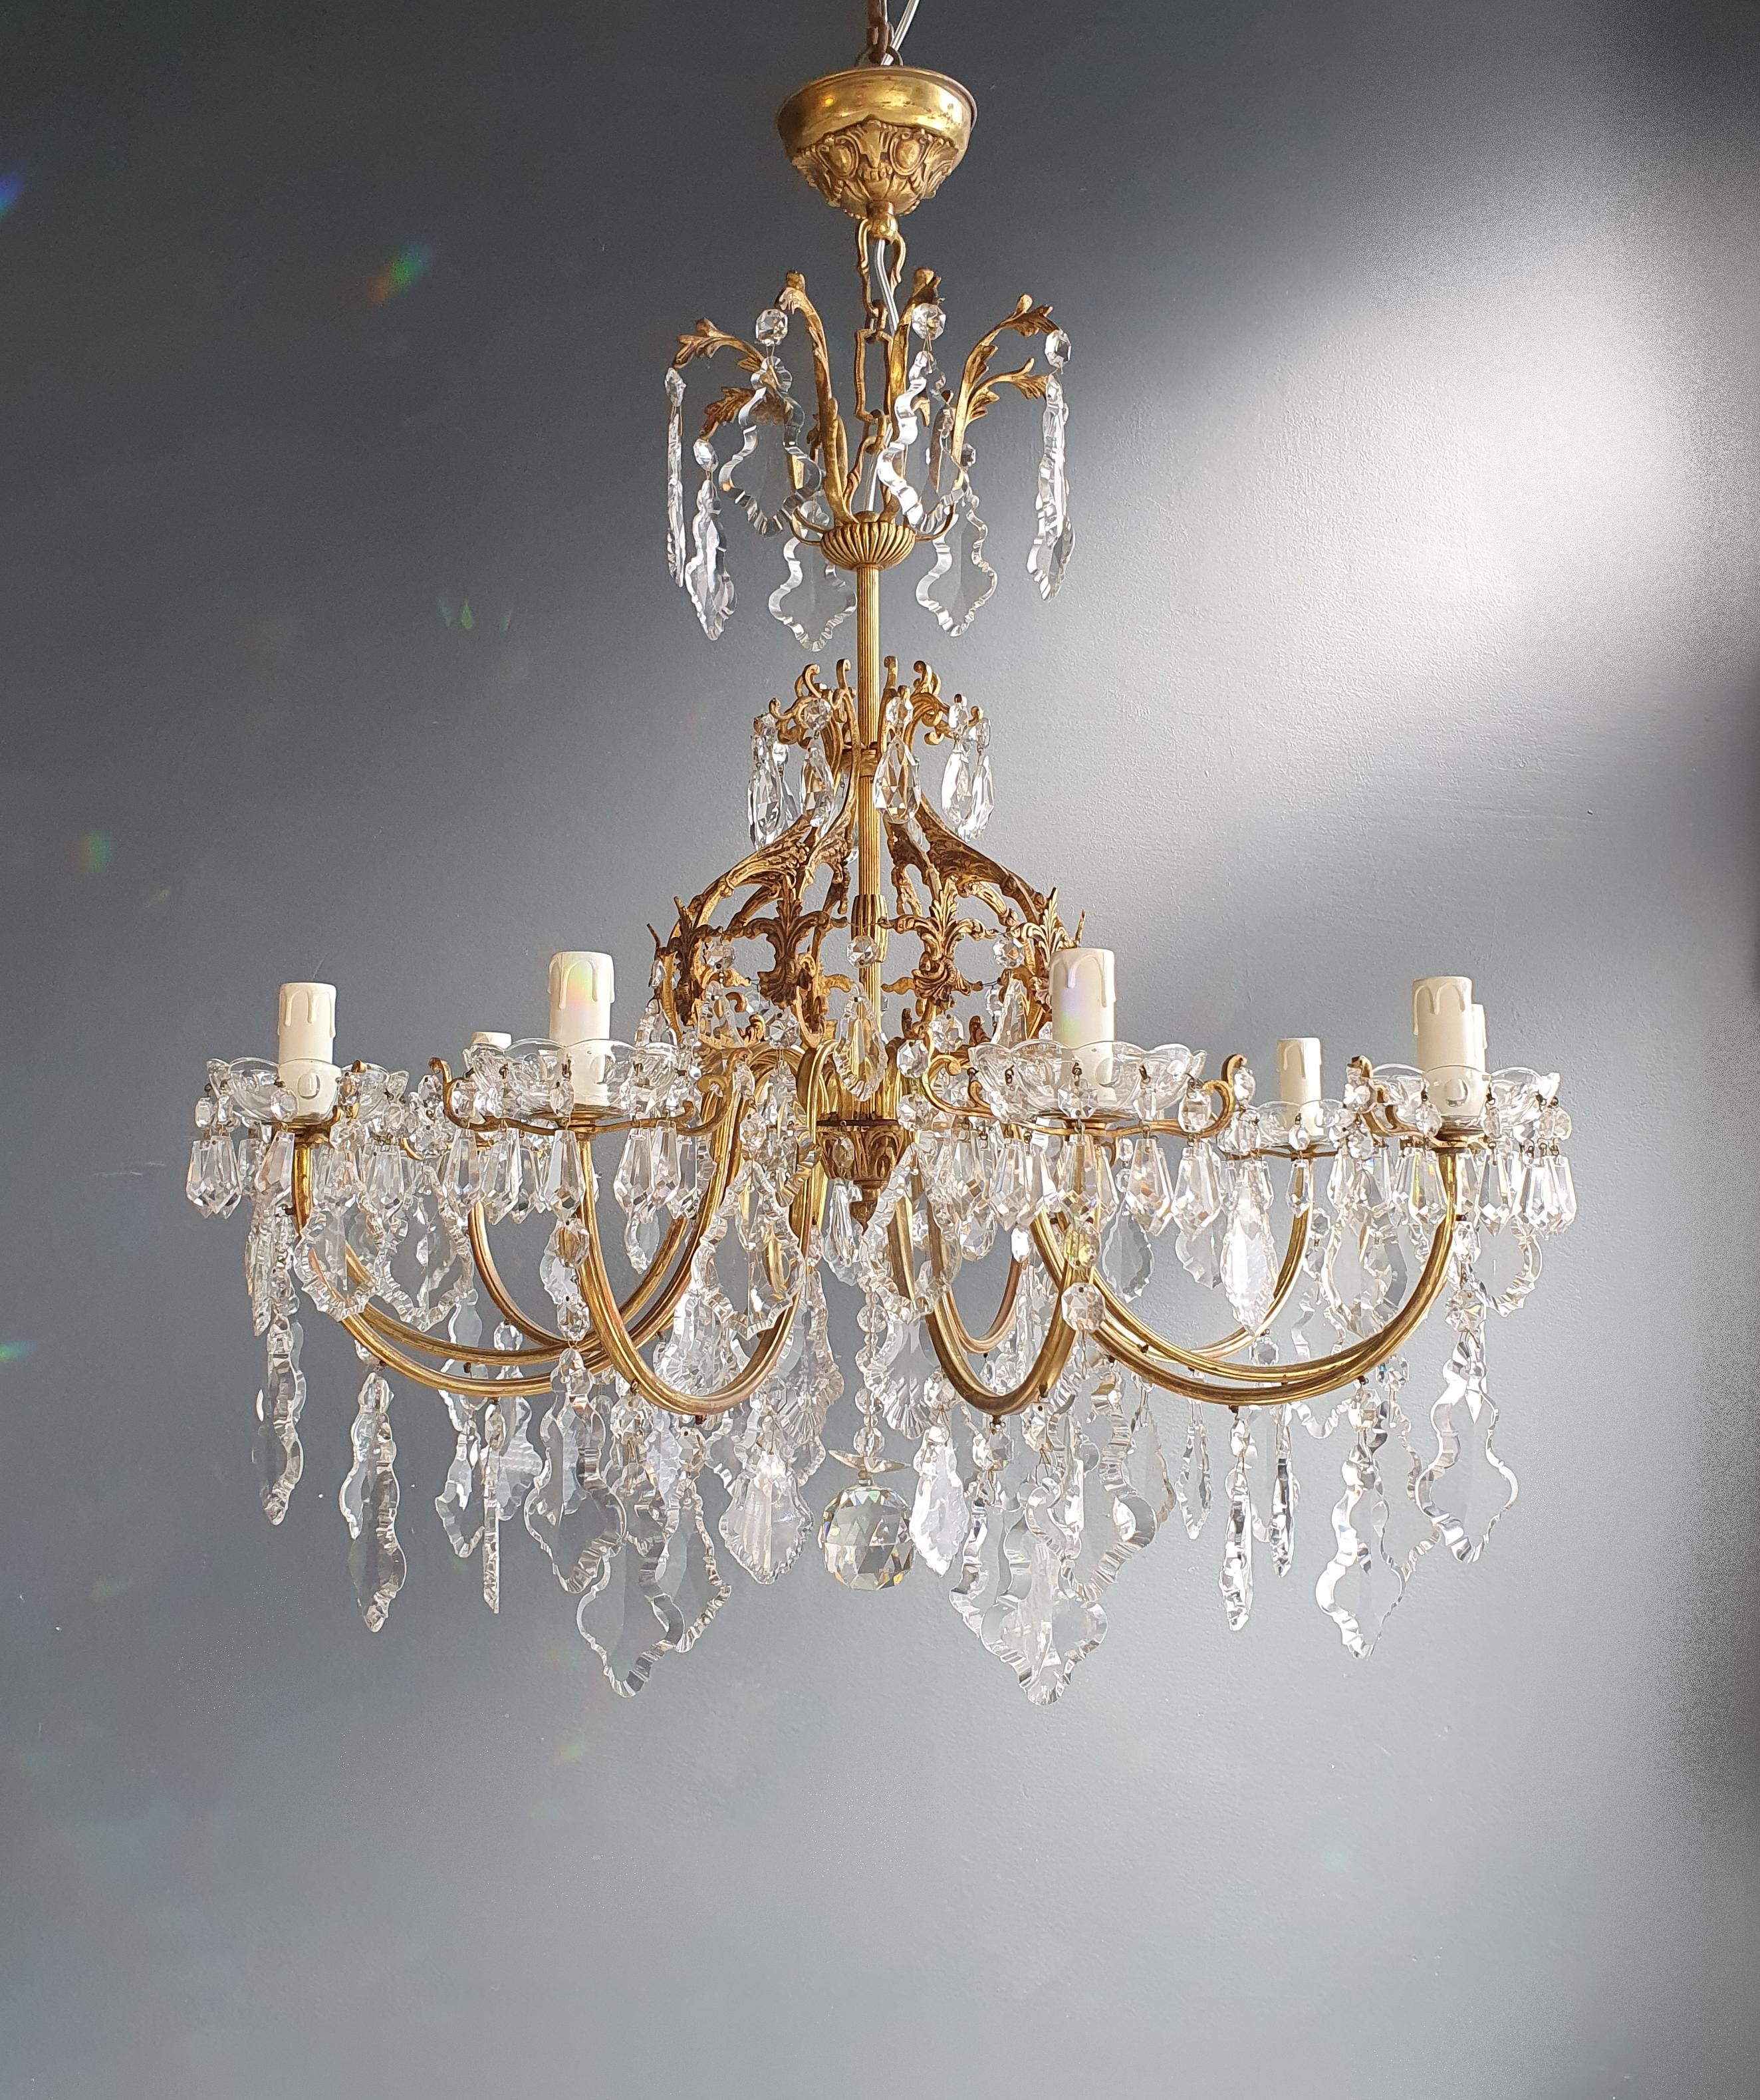 Beaded brass crystal chandelier antique ceiling lamp lustre Art Nouveau lamp

Measures: Total height 99 cm, height without chain 80 cm, diameter 80 cm. Weight (approximately) 15 kg.

Number of lights: 10-light bulb sockets: E14
Material: Brass,